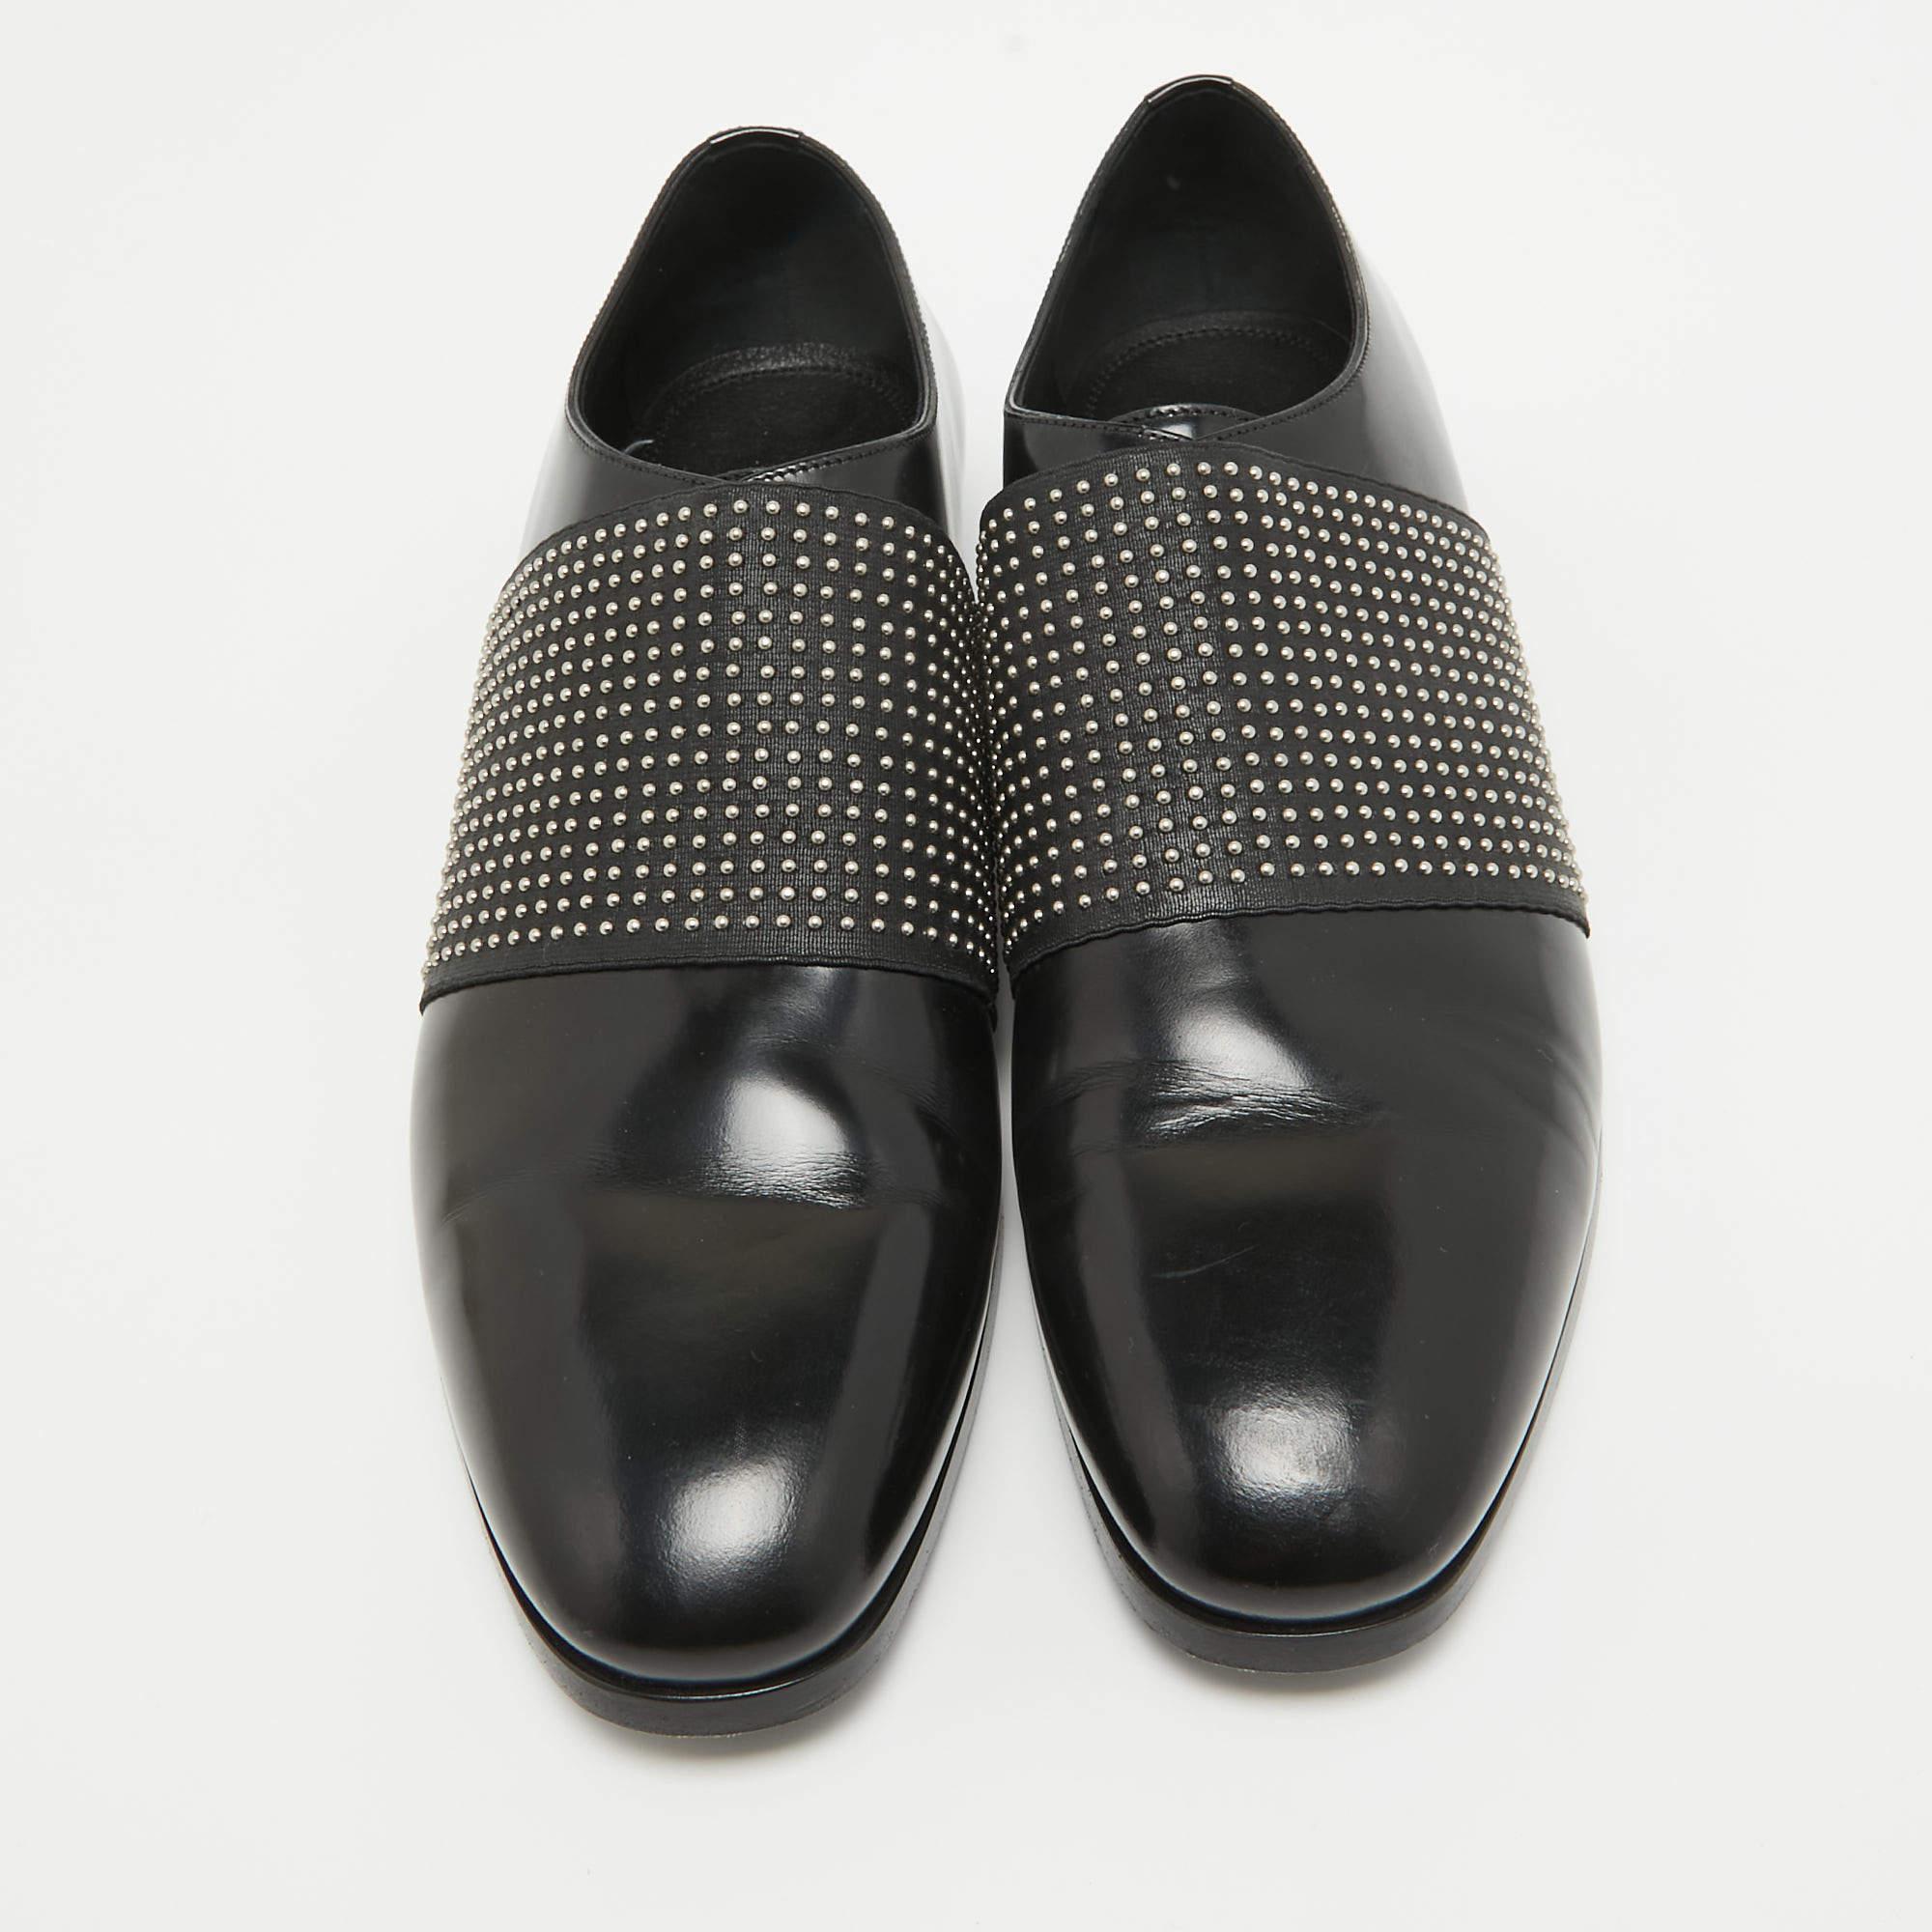 Practical, fashionable, and durable—these designer loafers are carefully built to be fine companions to your everyday style. They come made using the best materials to be a prized buy.

Includes: Original Dustbag

